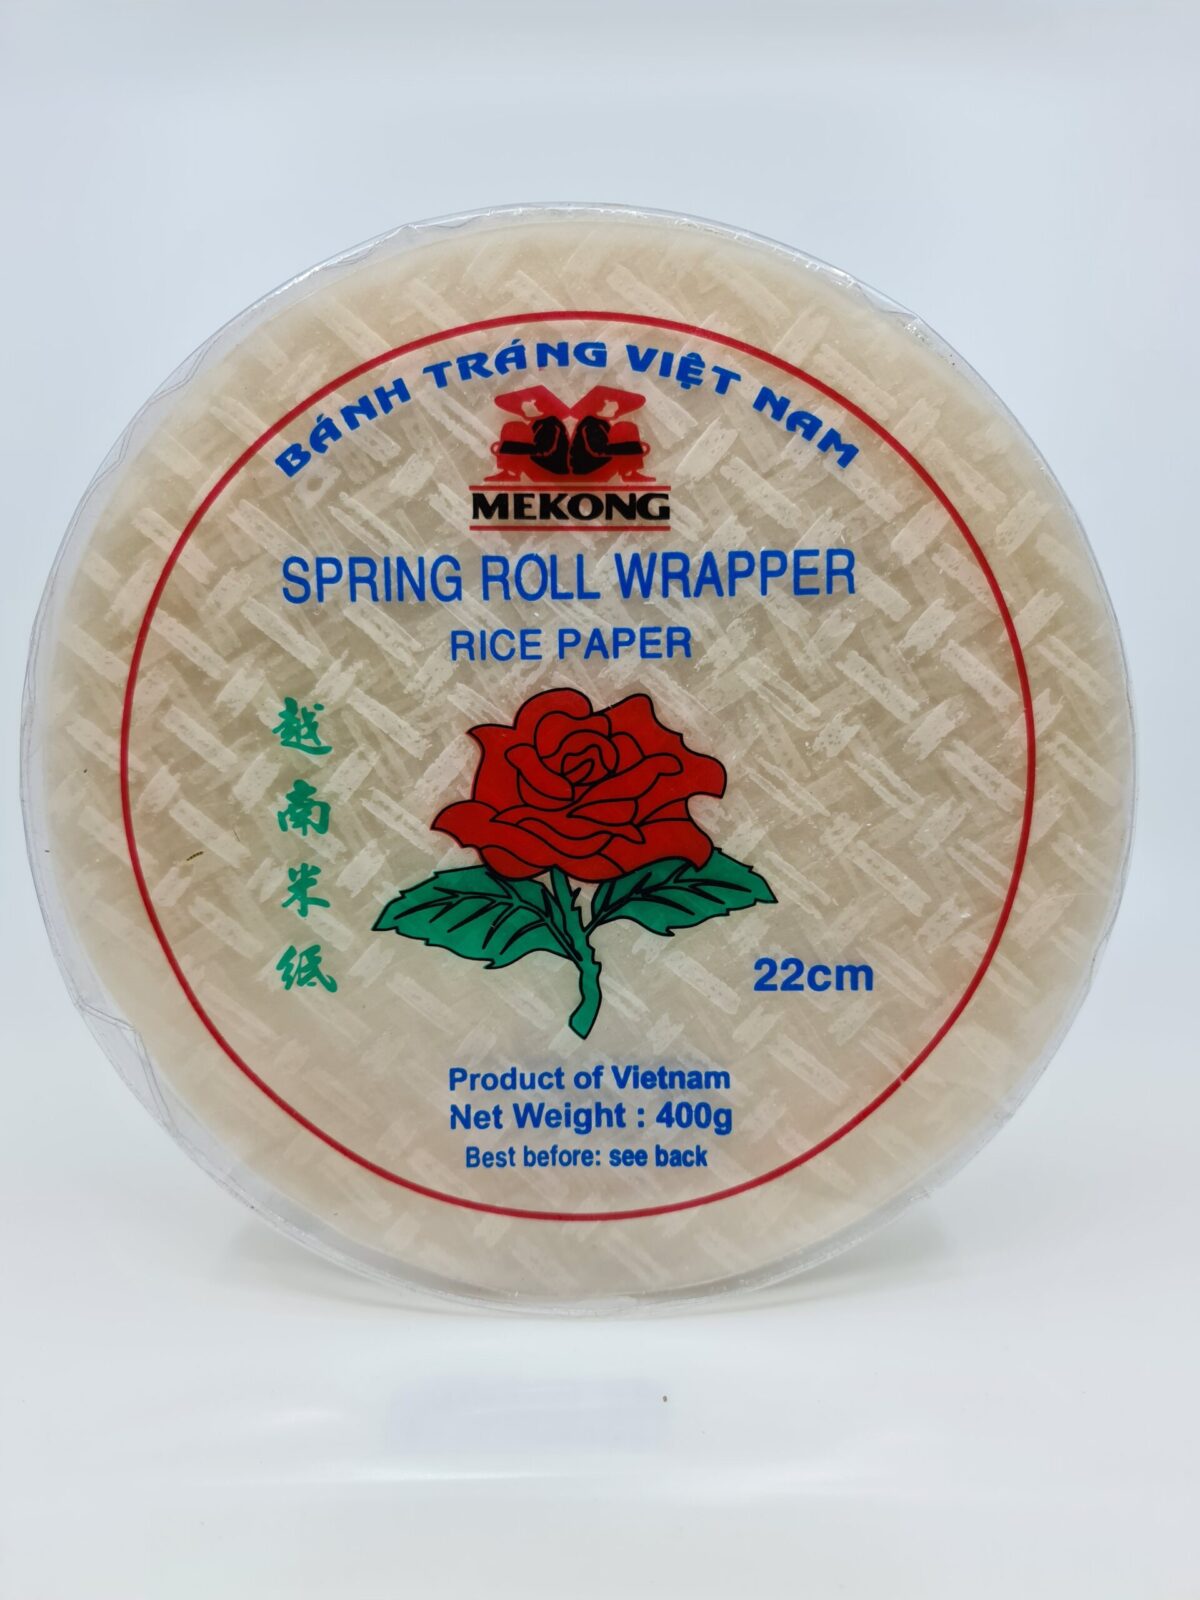 Spring Roll Wrapper Rice Paper Banh Trang 22cm - 400g - Toko Indonesia